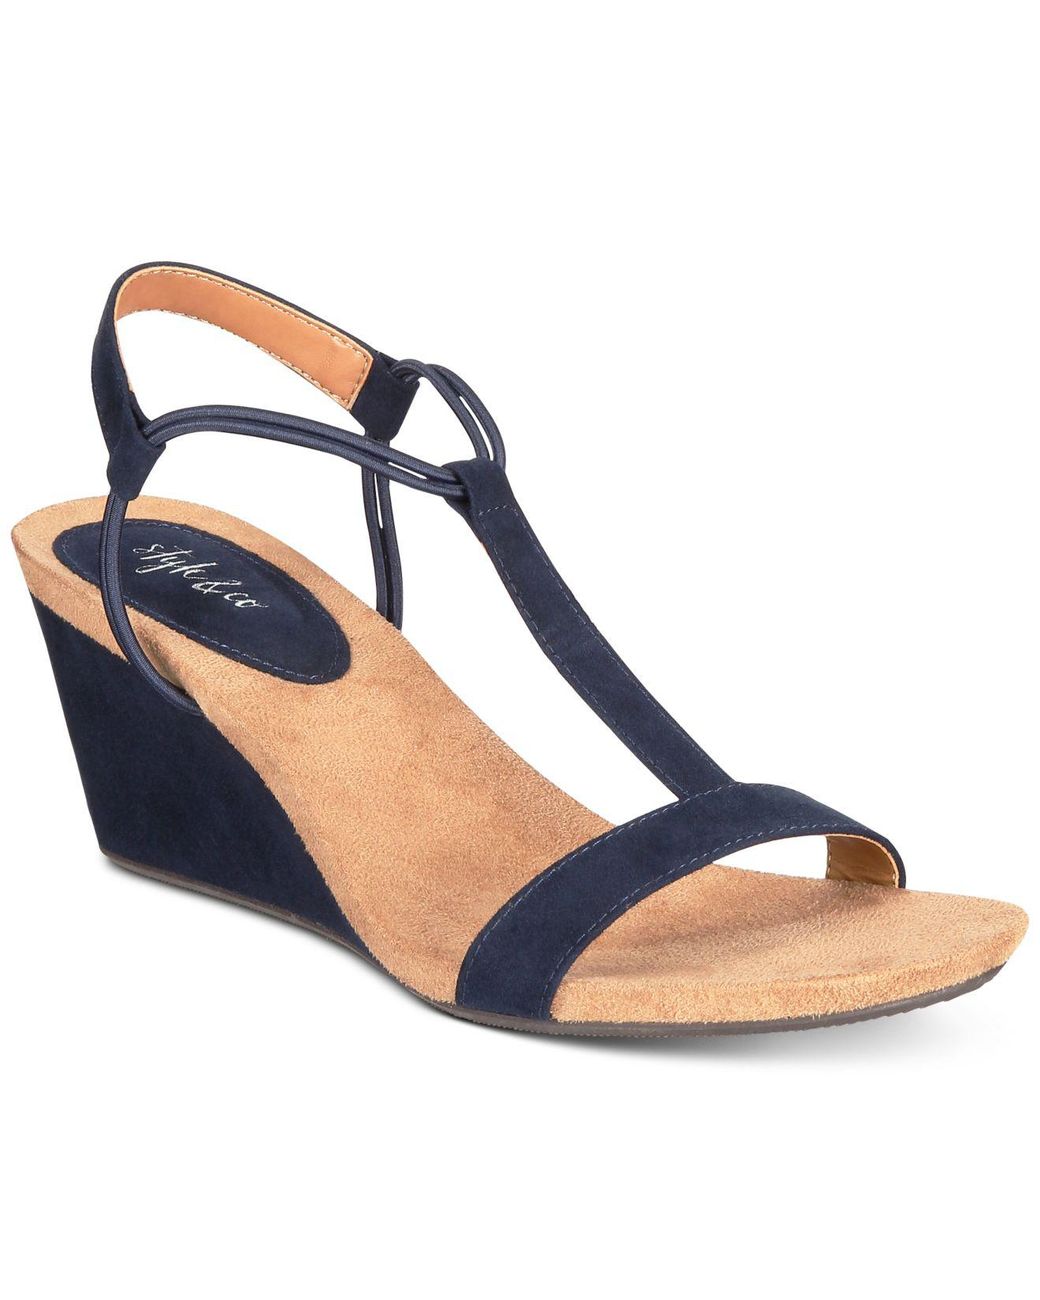 Style & Co. Mulan Wedge Sandals in Navy (Blue) - Lyst